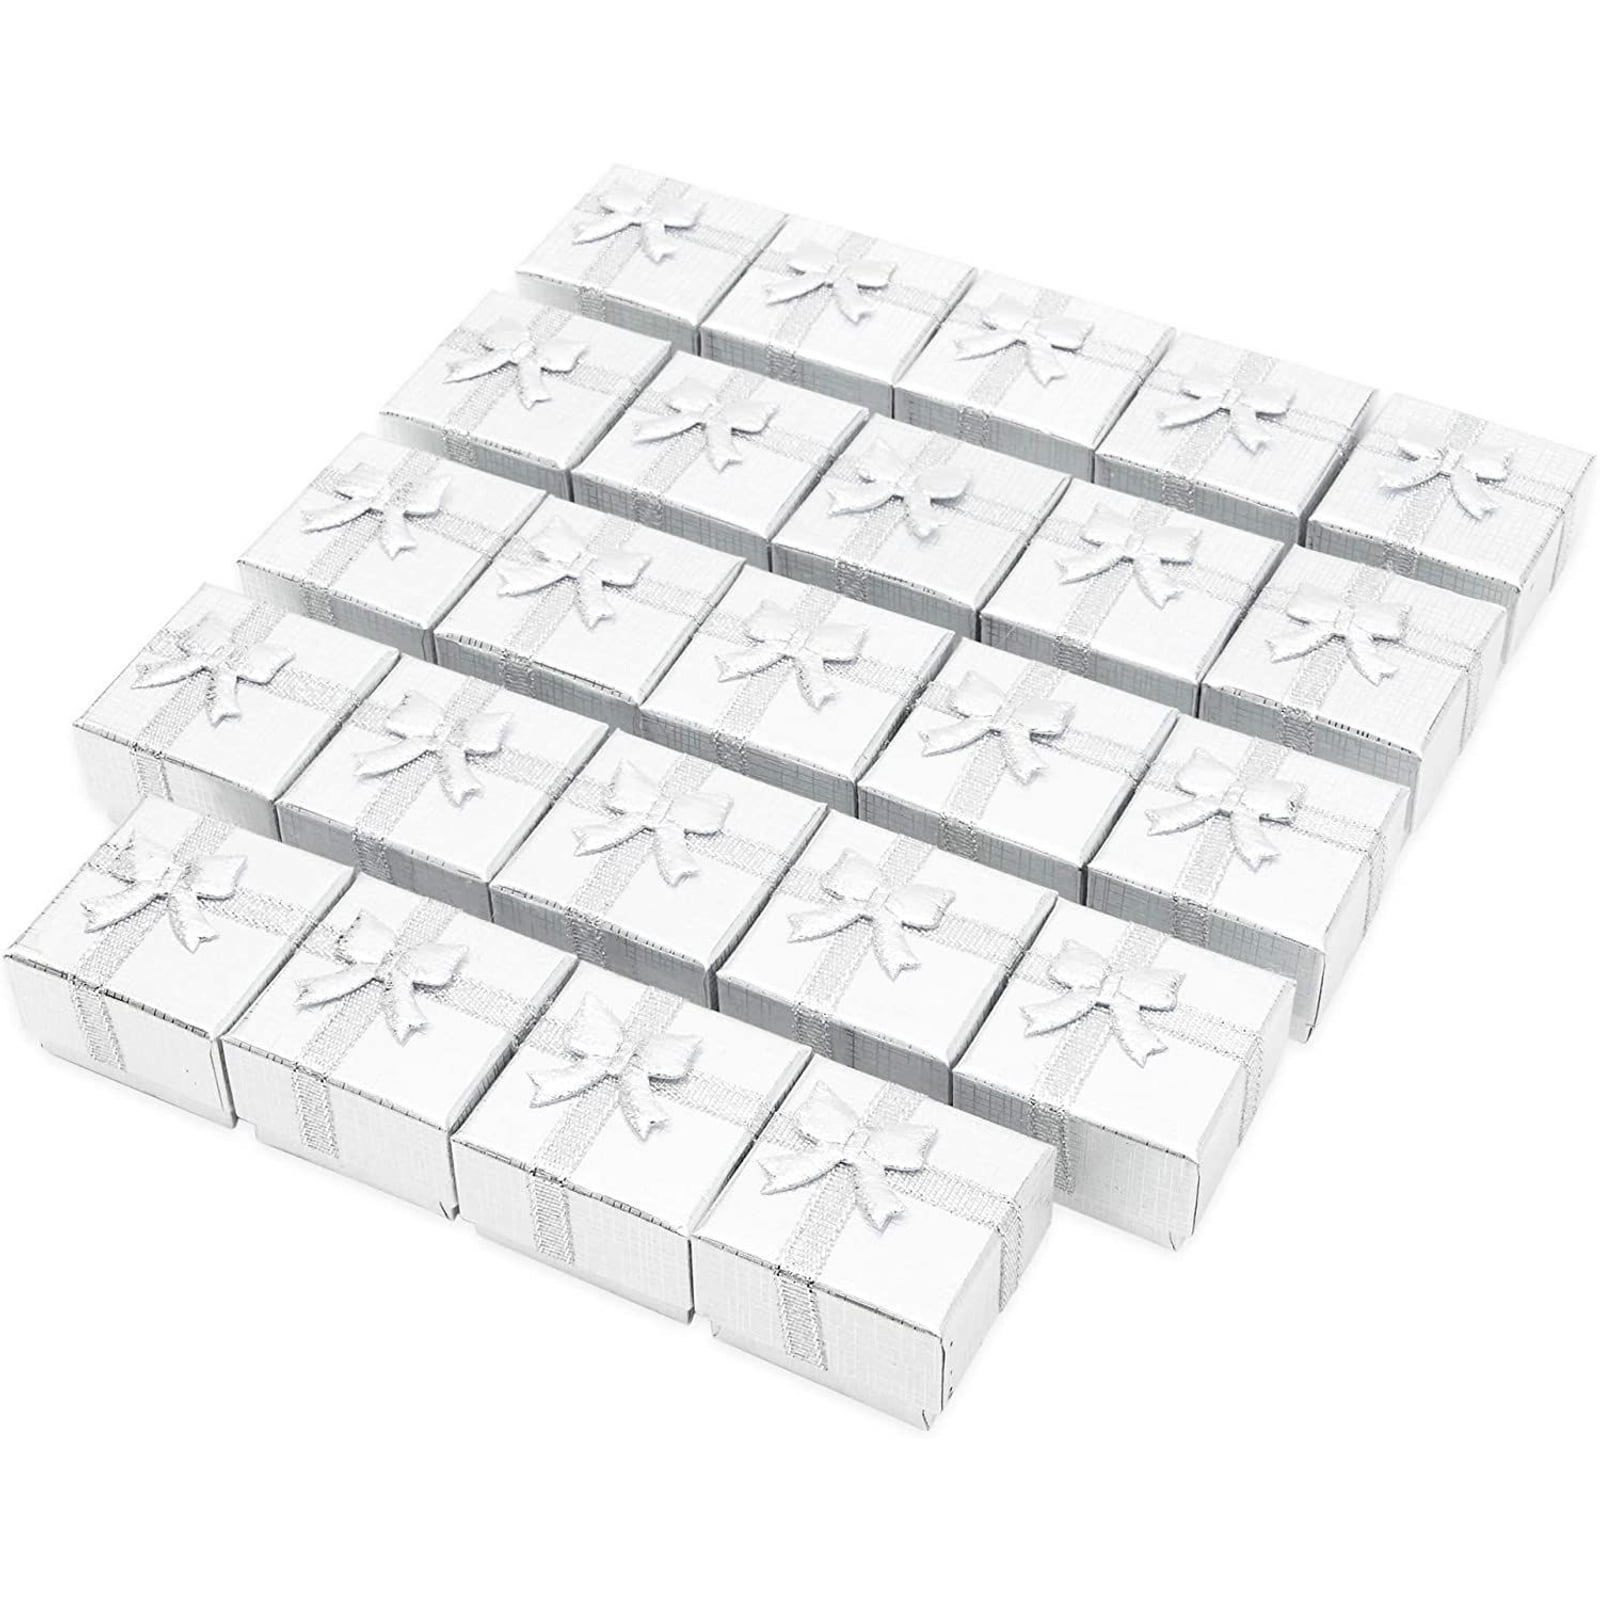 by TheDisplayGuys Earrings Metallic Foil Pendants 24-Pack Silver Jewelry Gift Boxes with White Velvet Foam Insert for Rings 